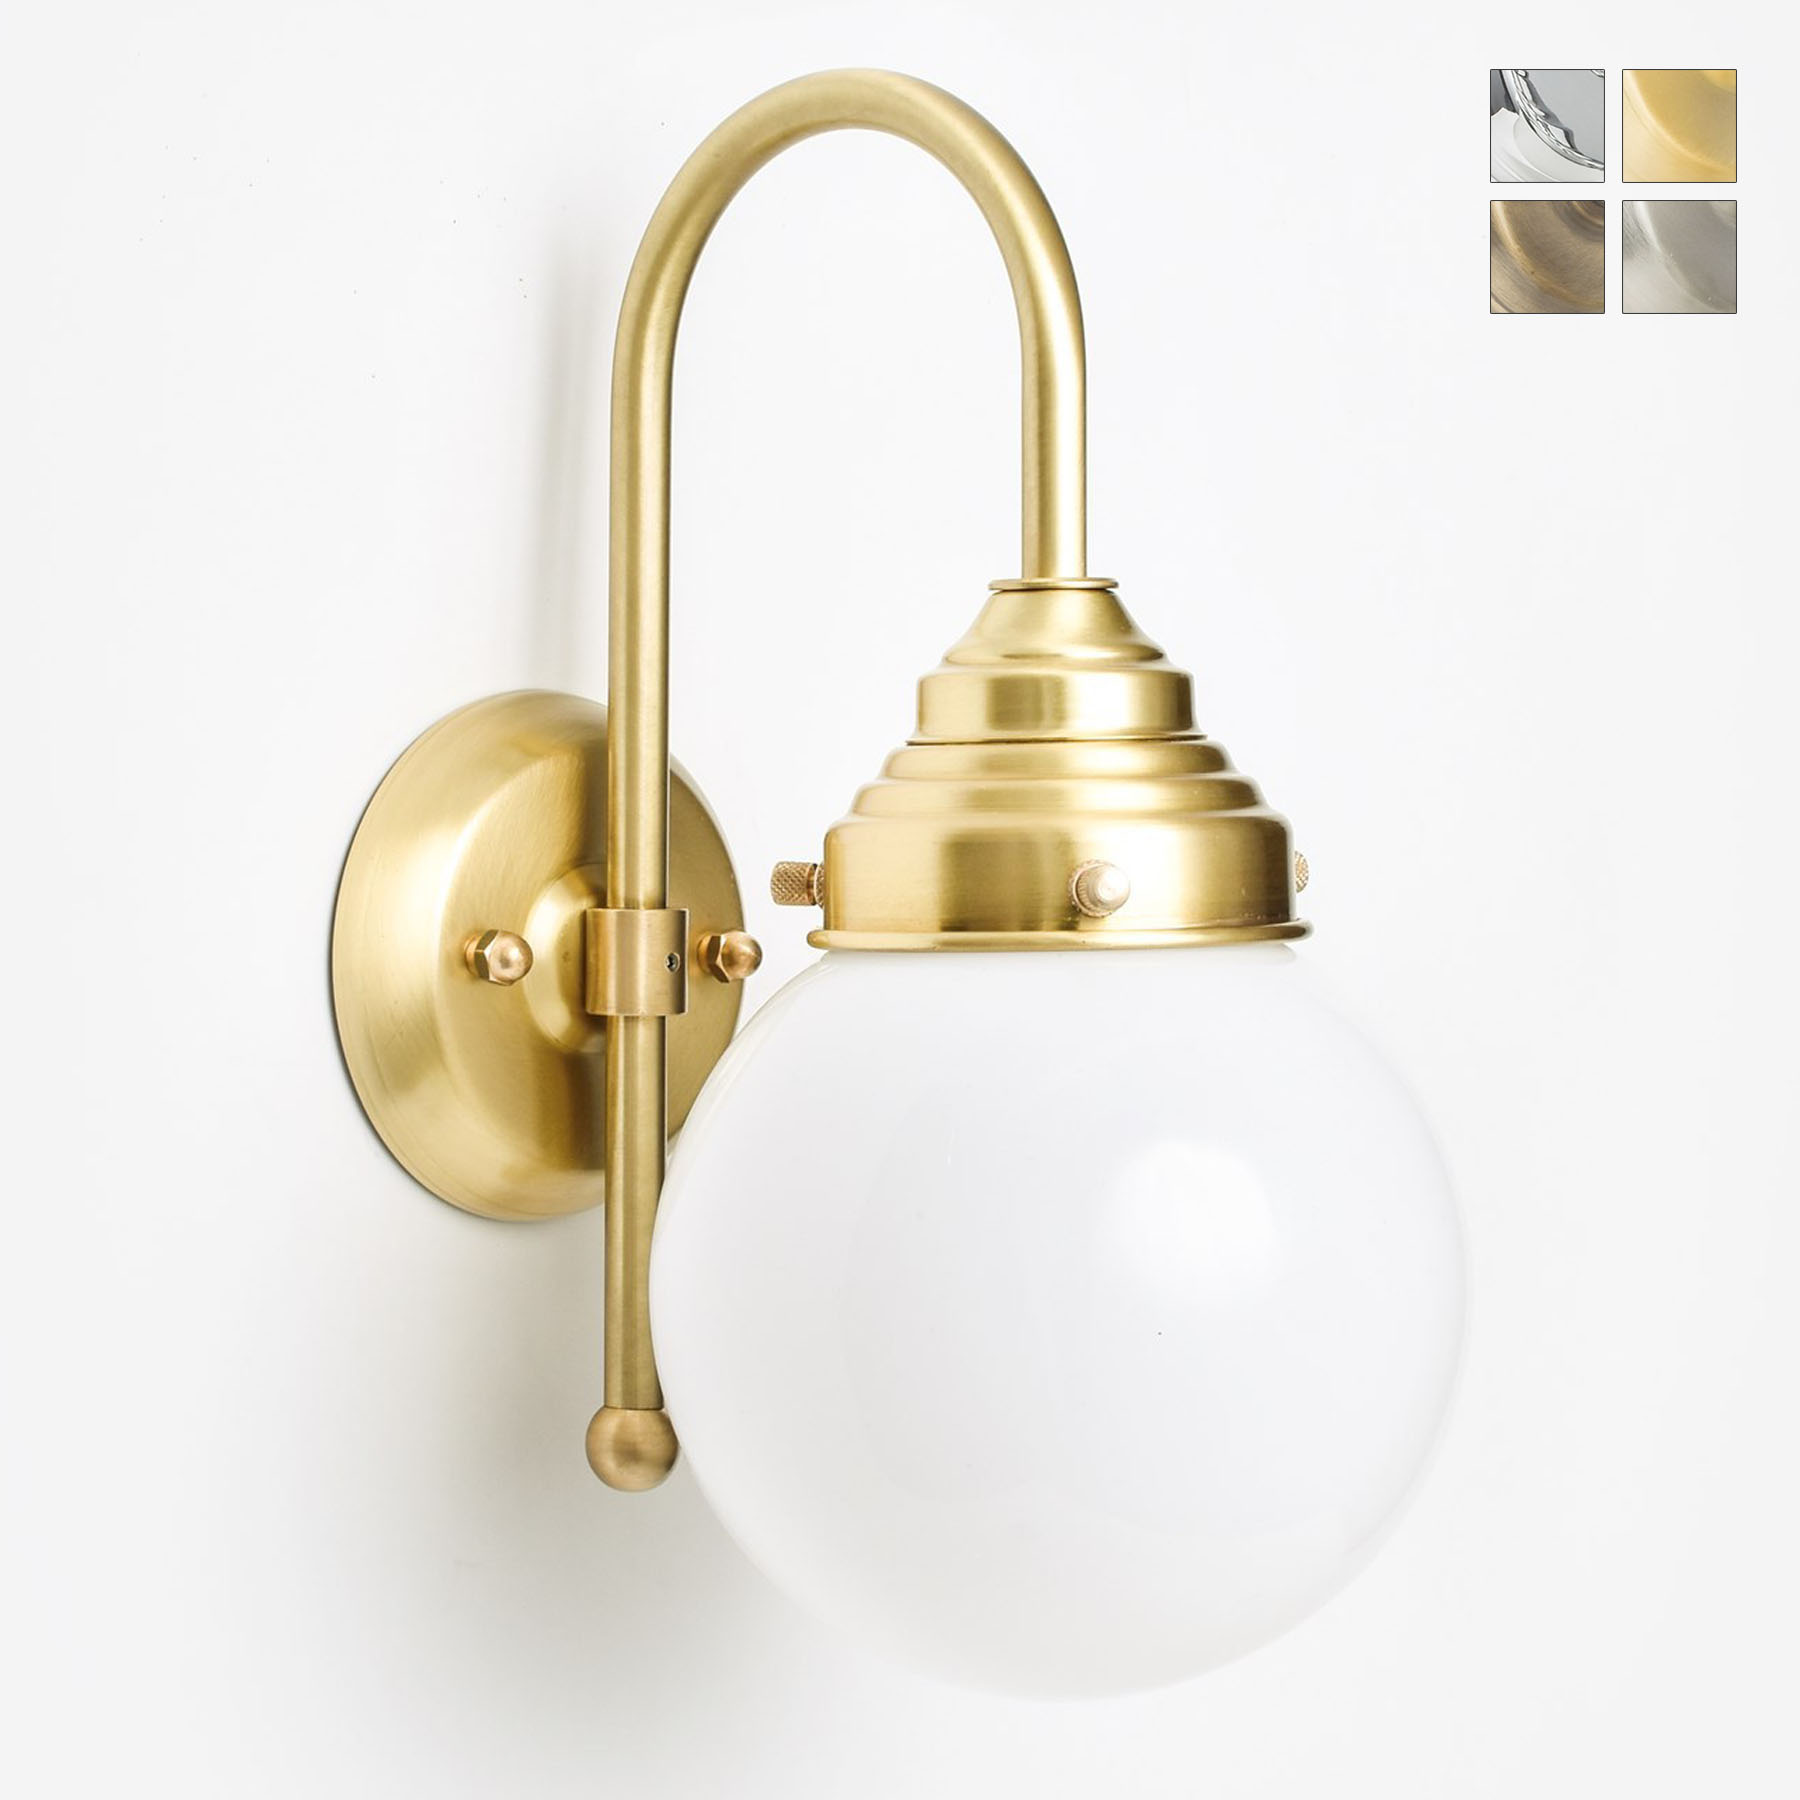 Small Bathroom Wall Lamp With Glass, Antique Brass Arc Arm Vanity Light